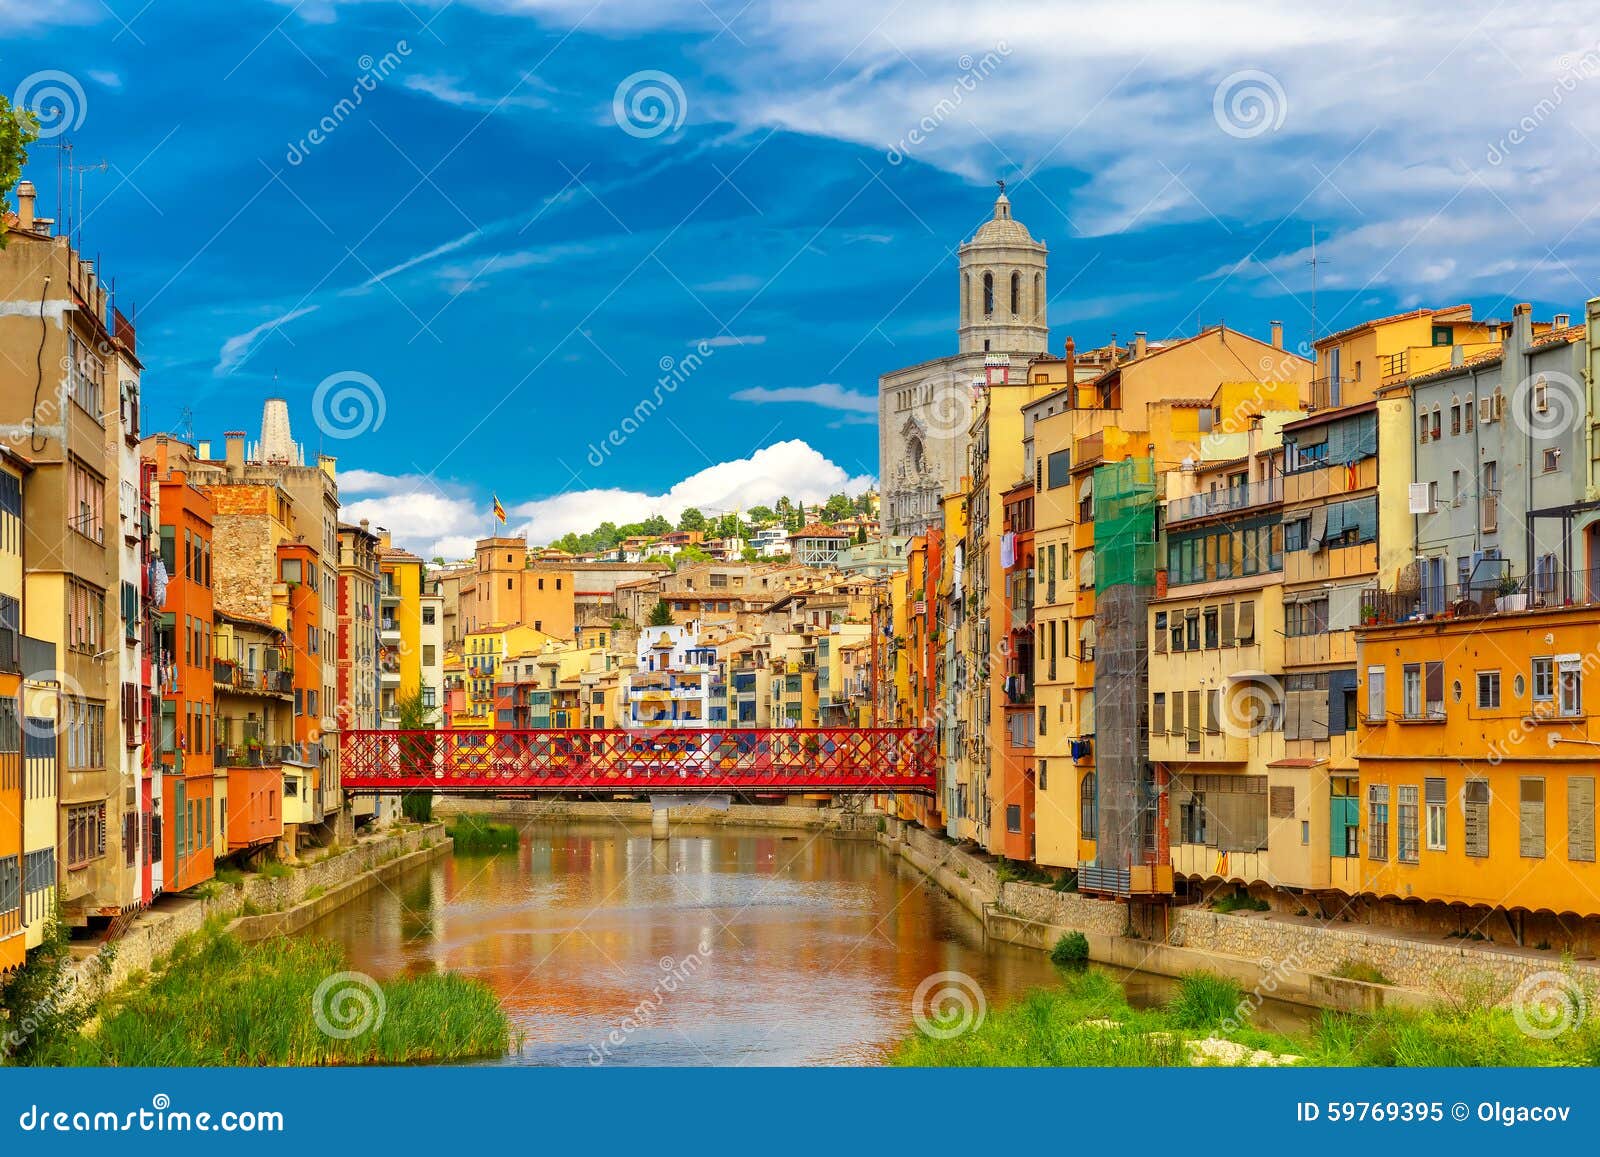 colorful houses in girona, catalonia, spain